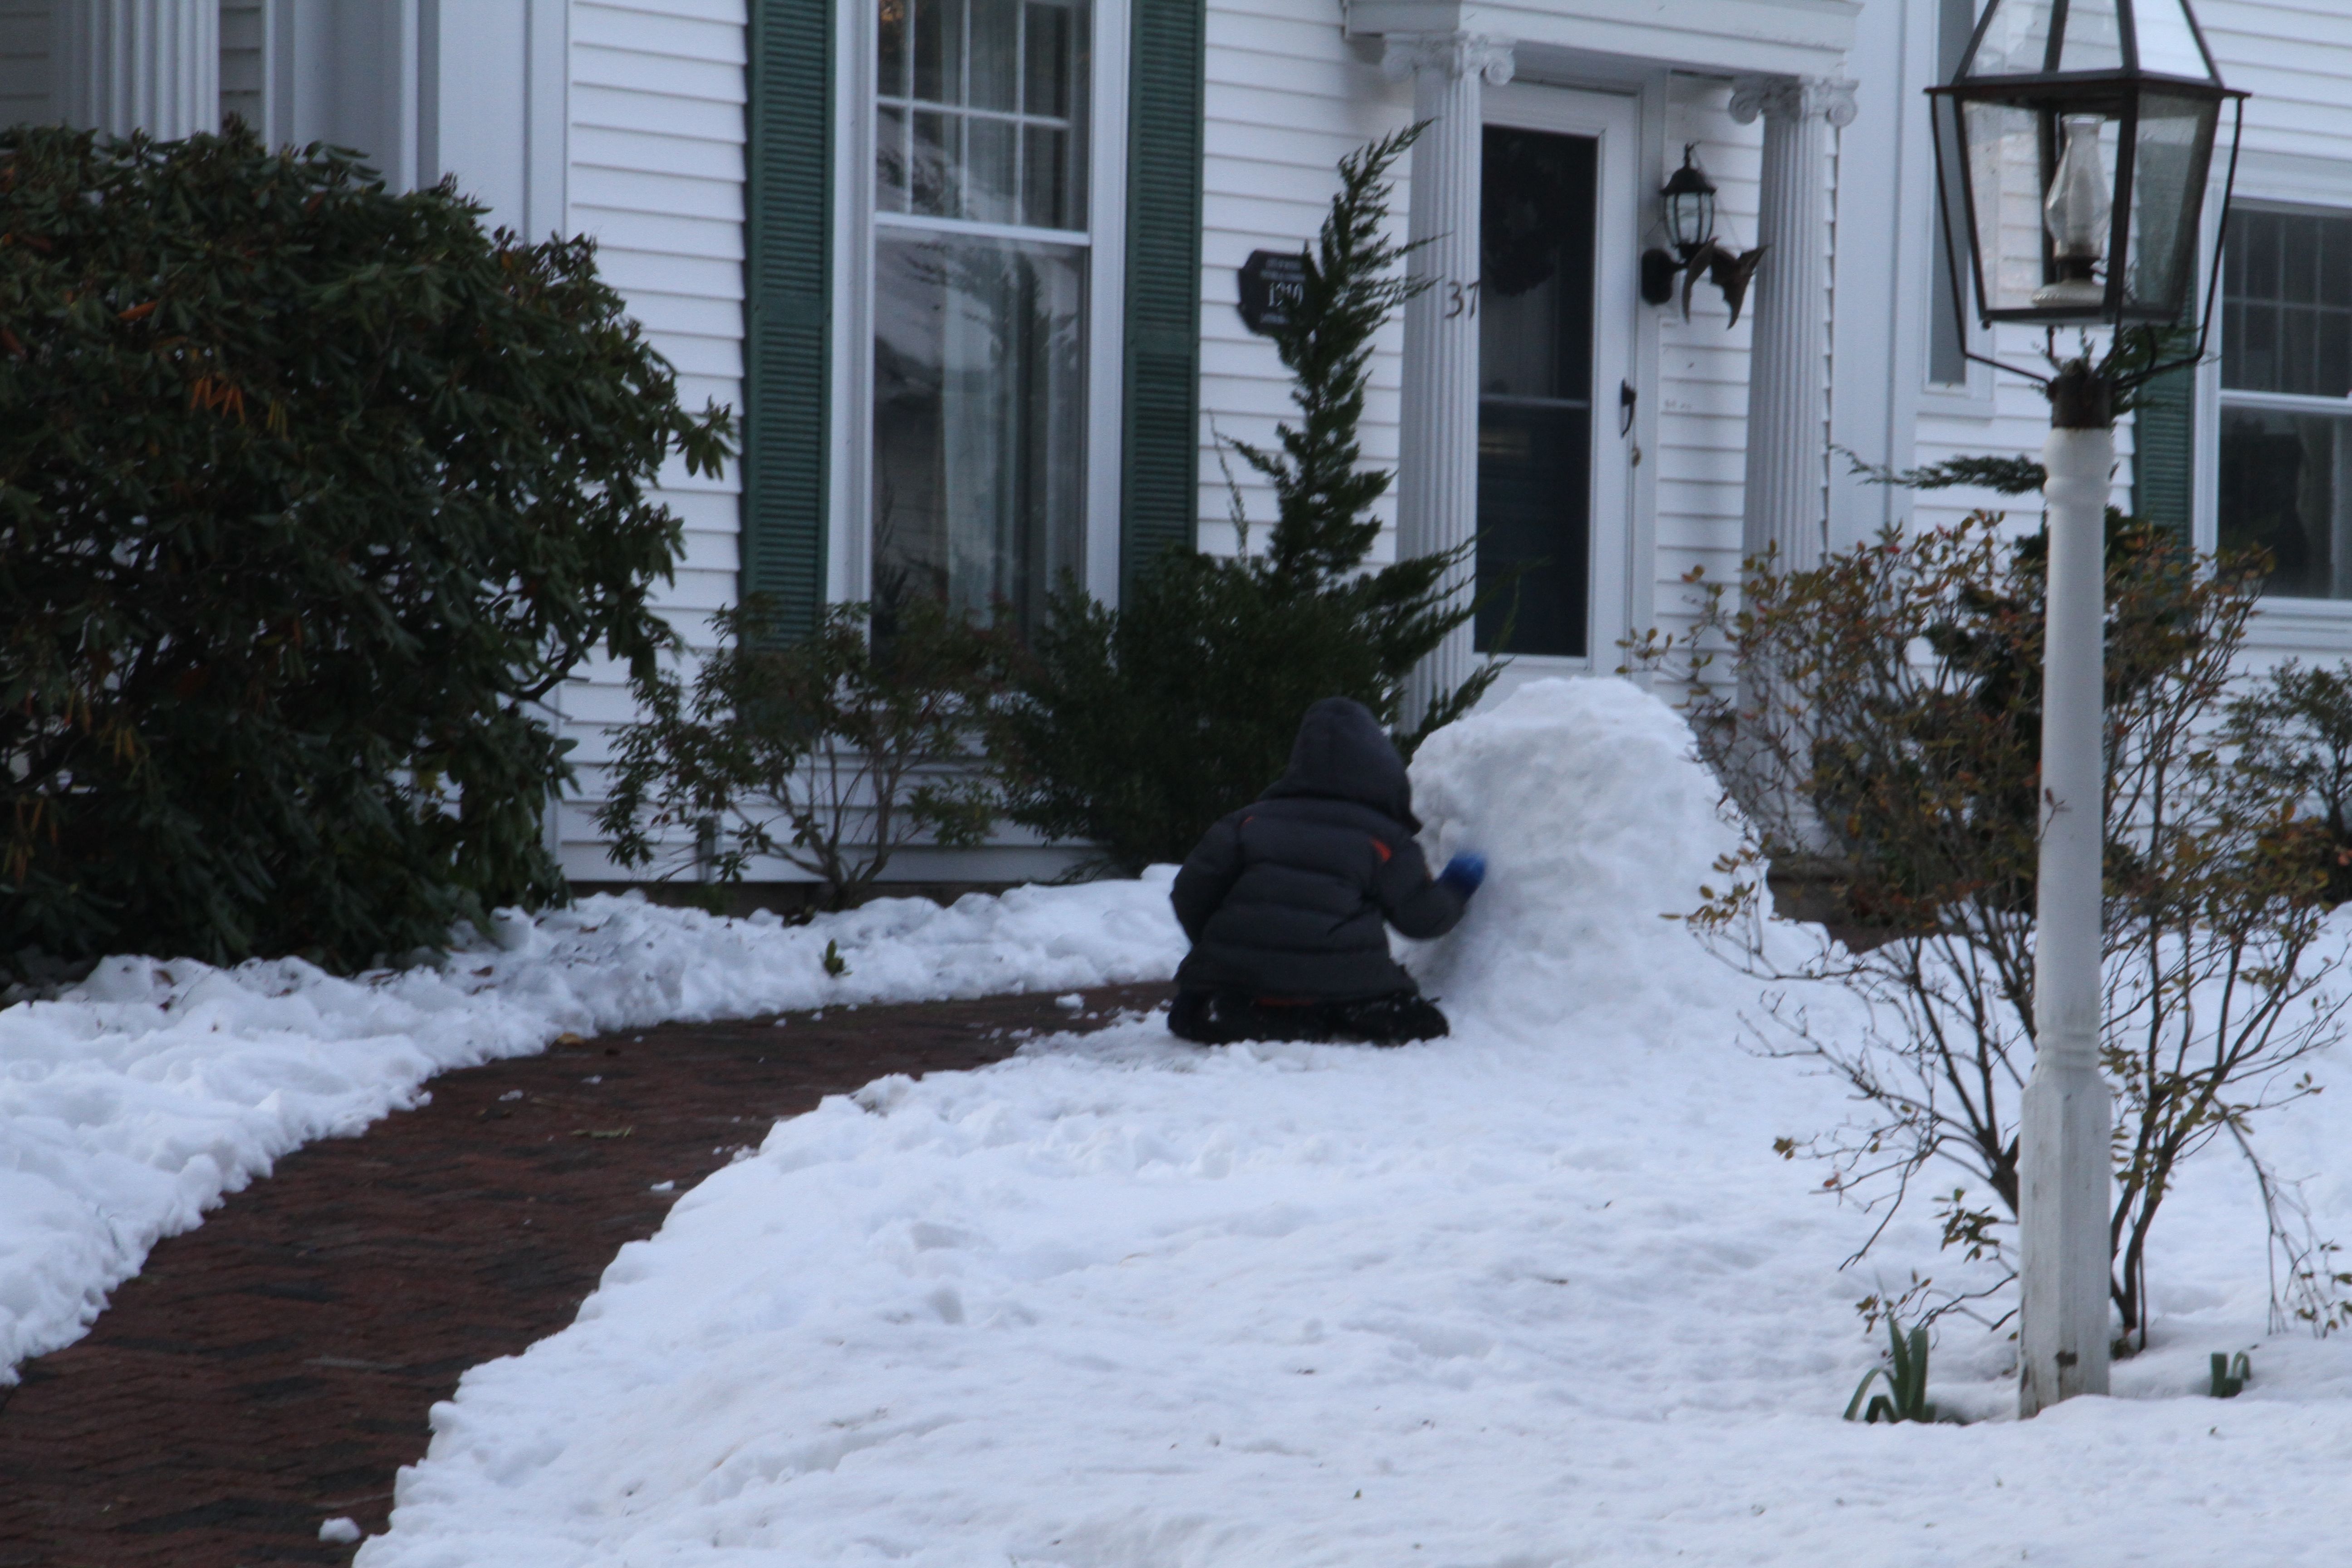 Typical but for the random neighborhood child building a snowman.